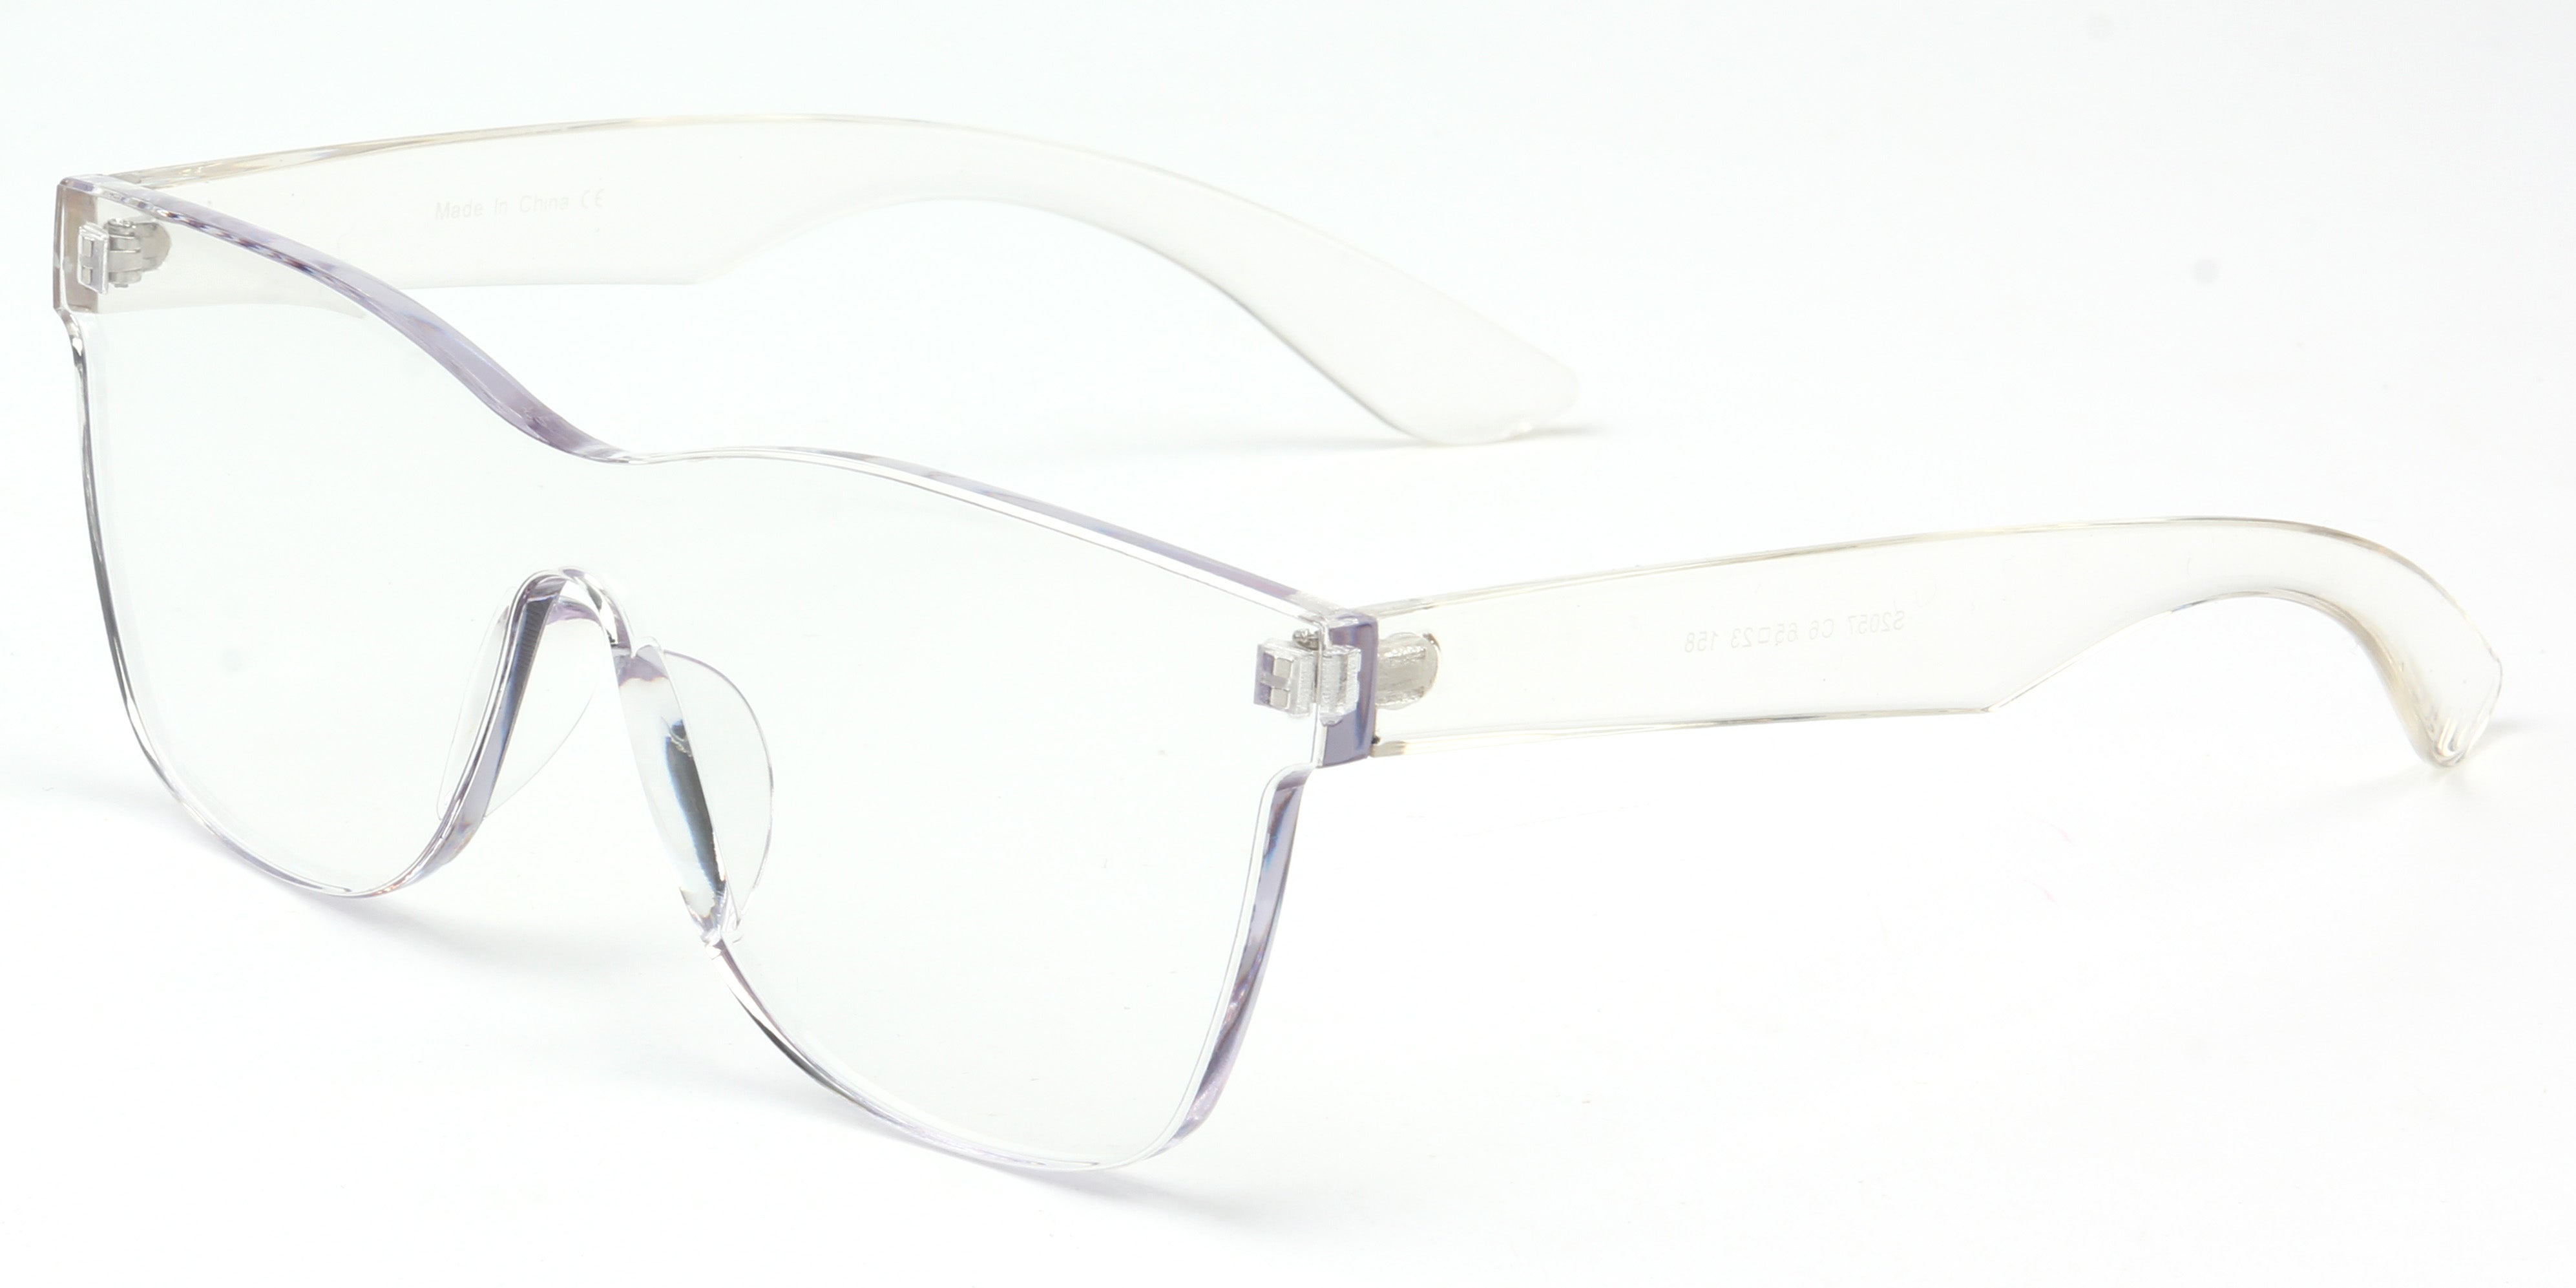 S2057 - Retro Flat Lens Square Tinted SUNGLASSES Clear